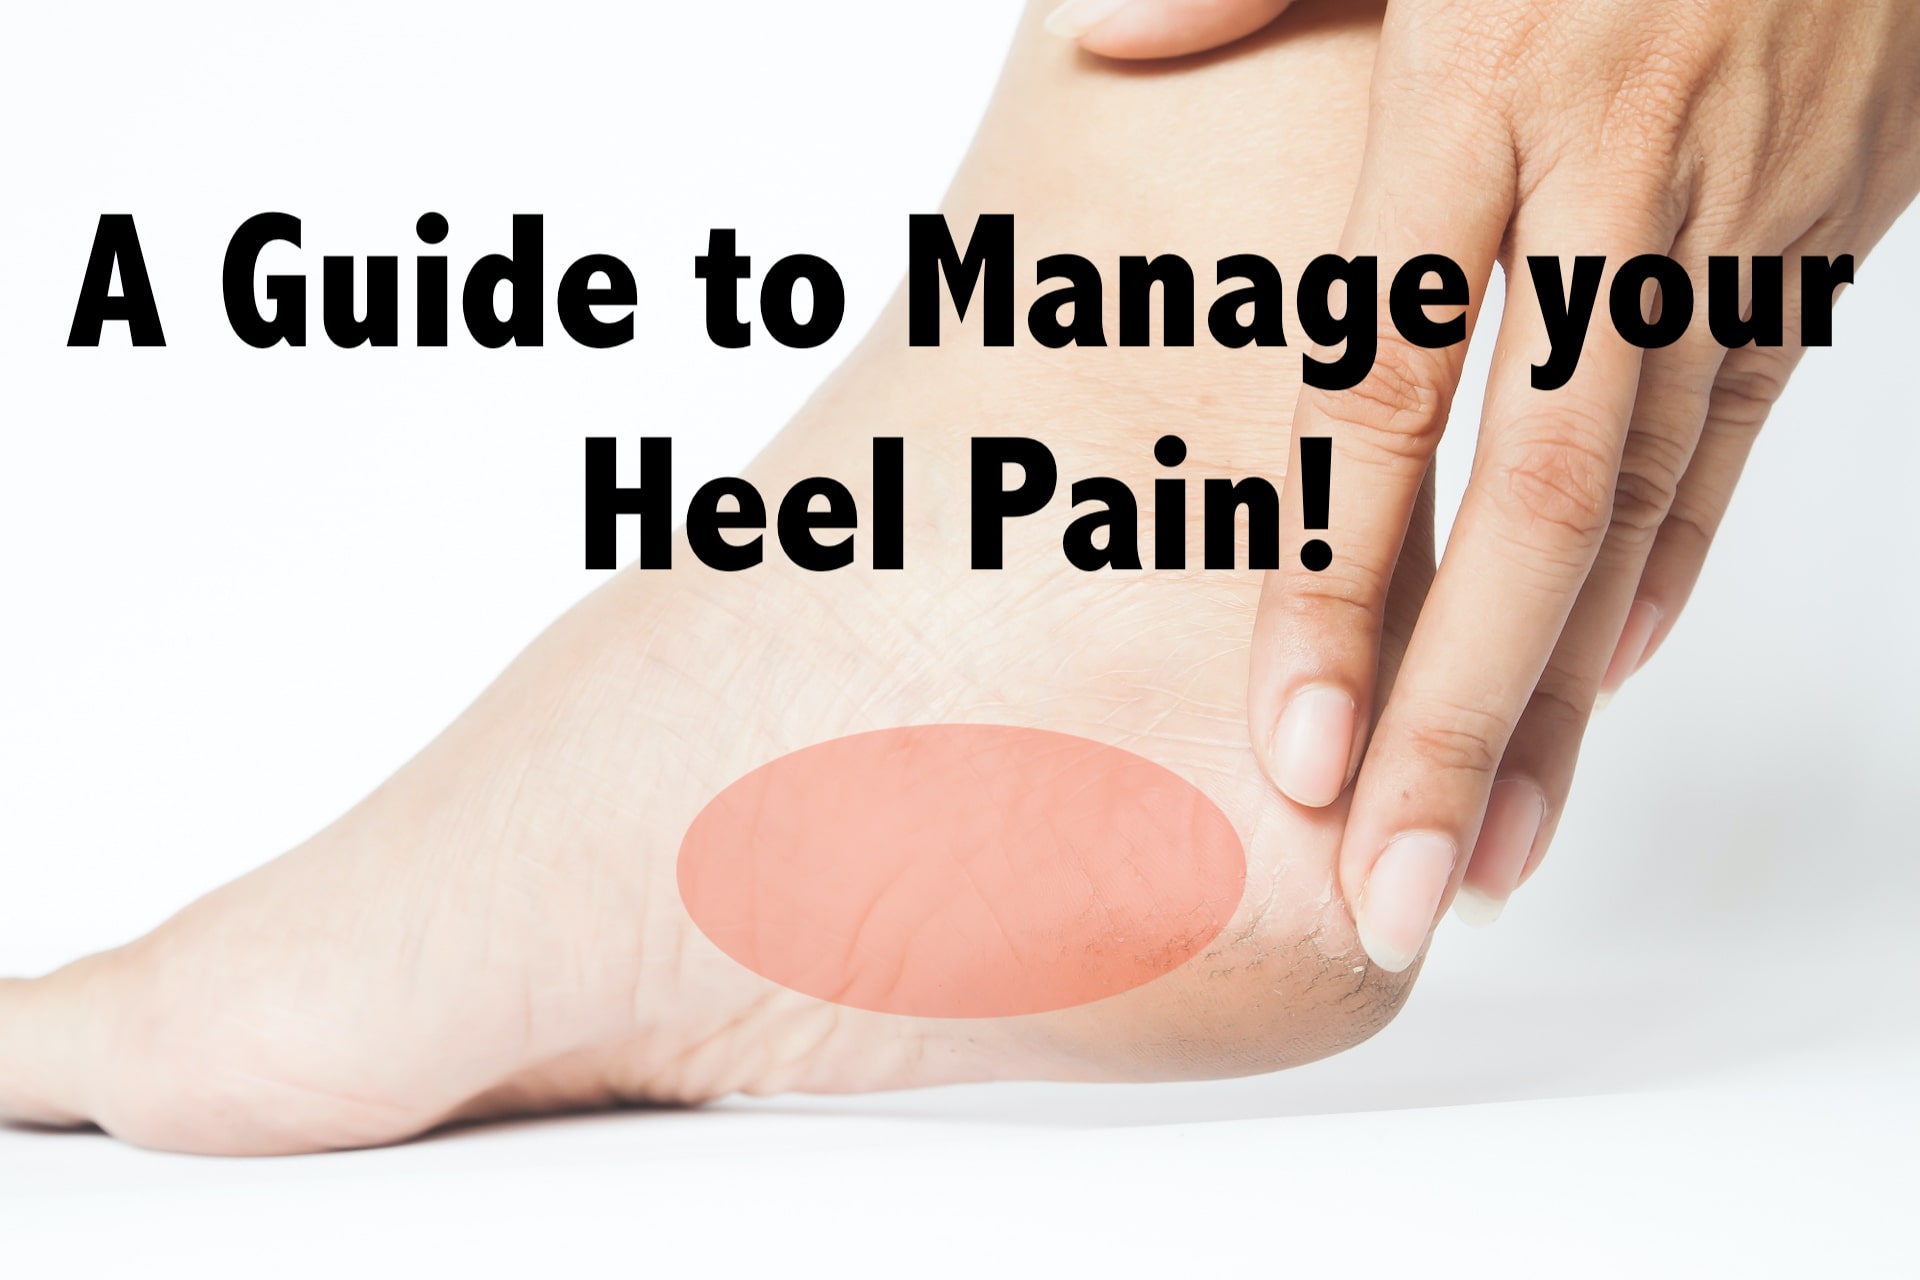 Heel Pain Has Many Causes | Podiatry Center of New Jersey